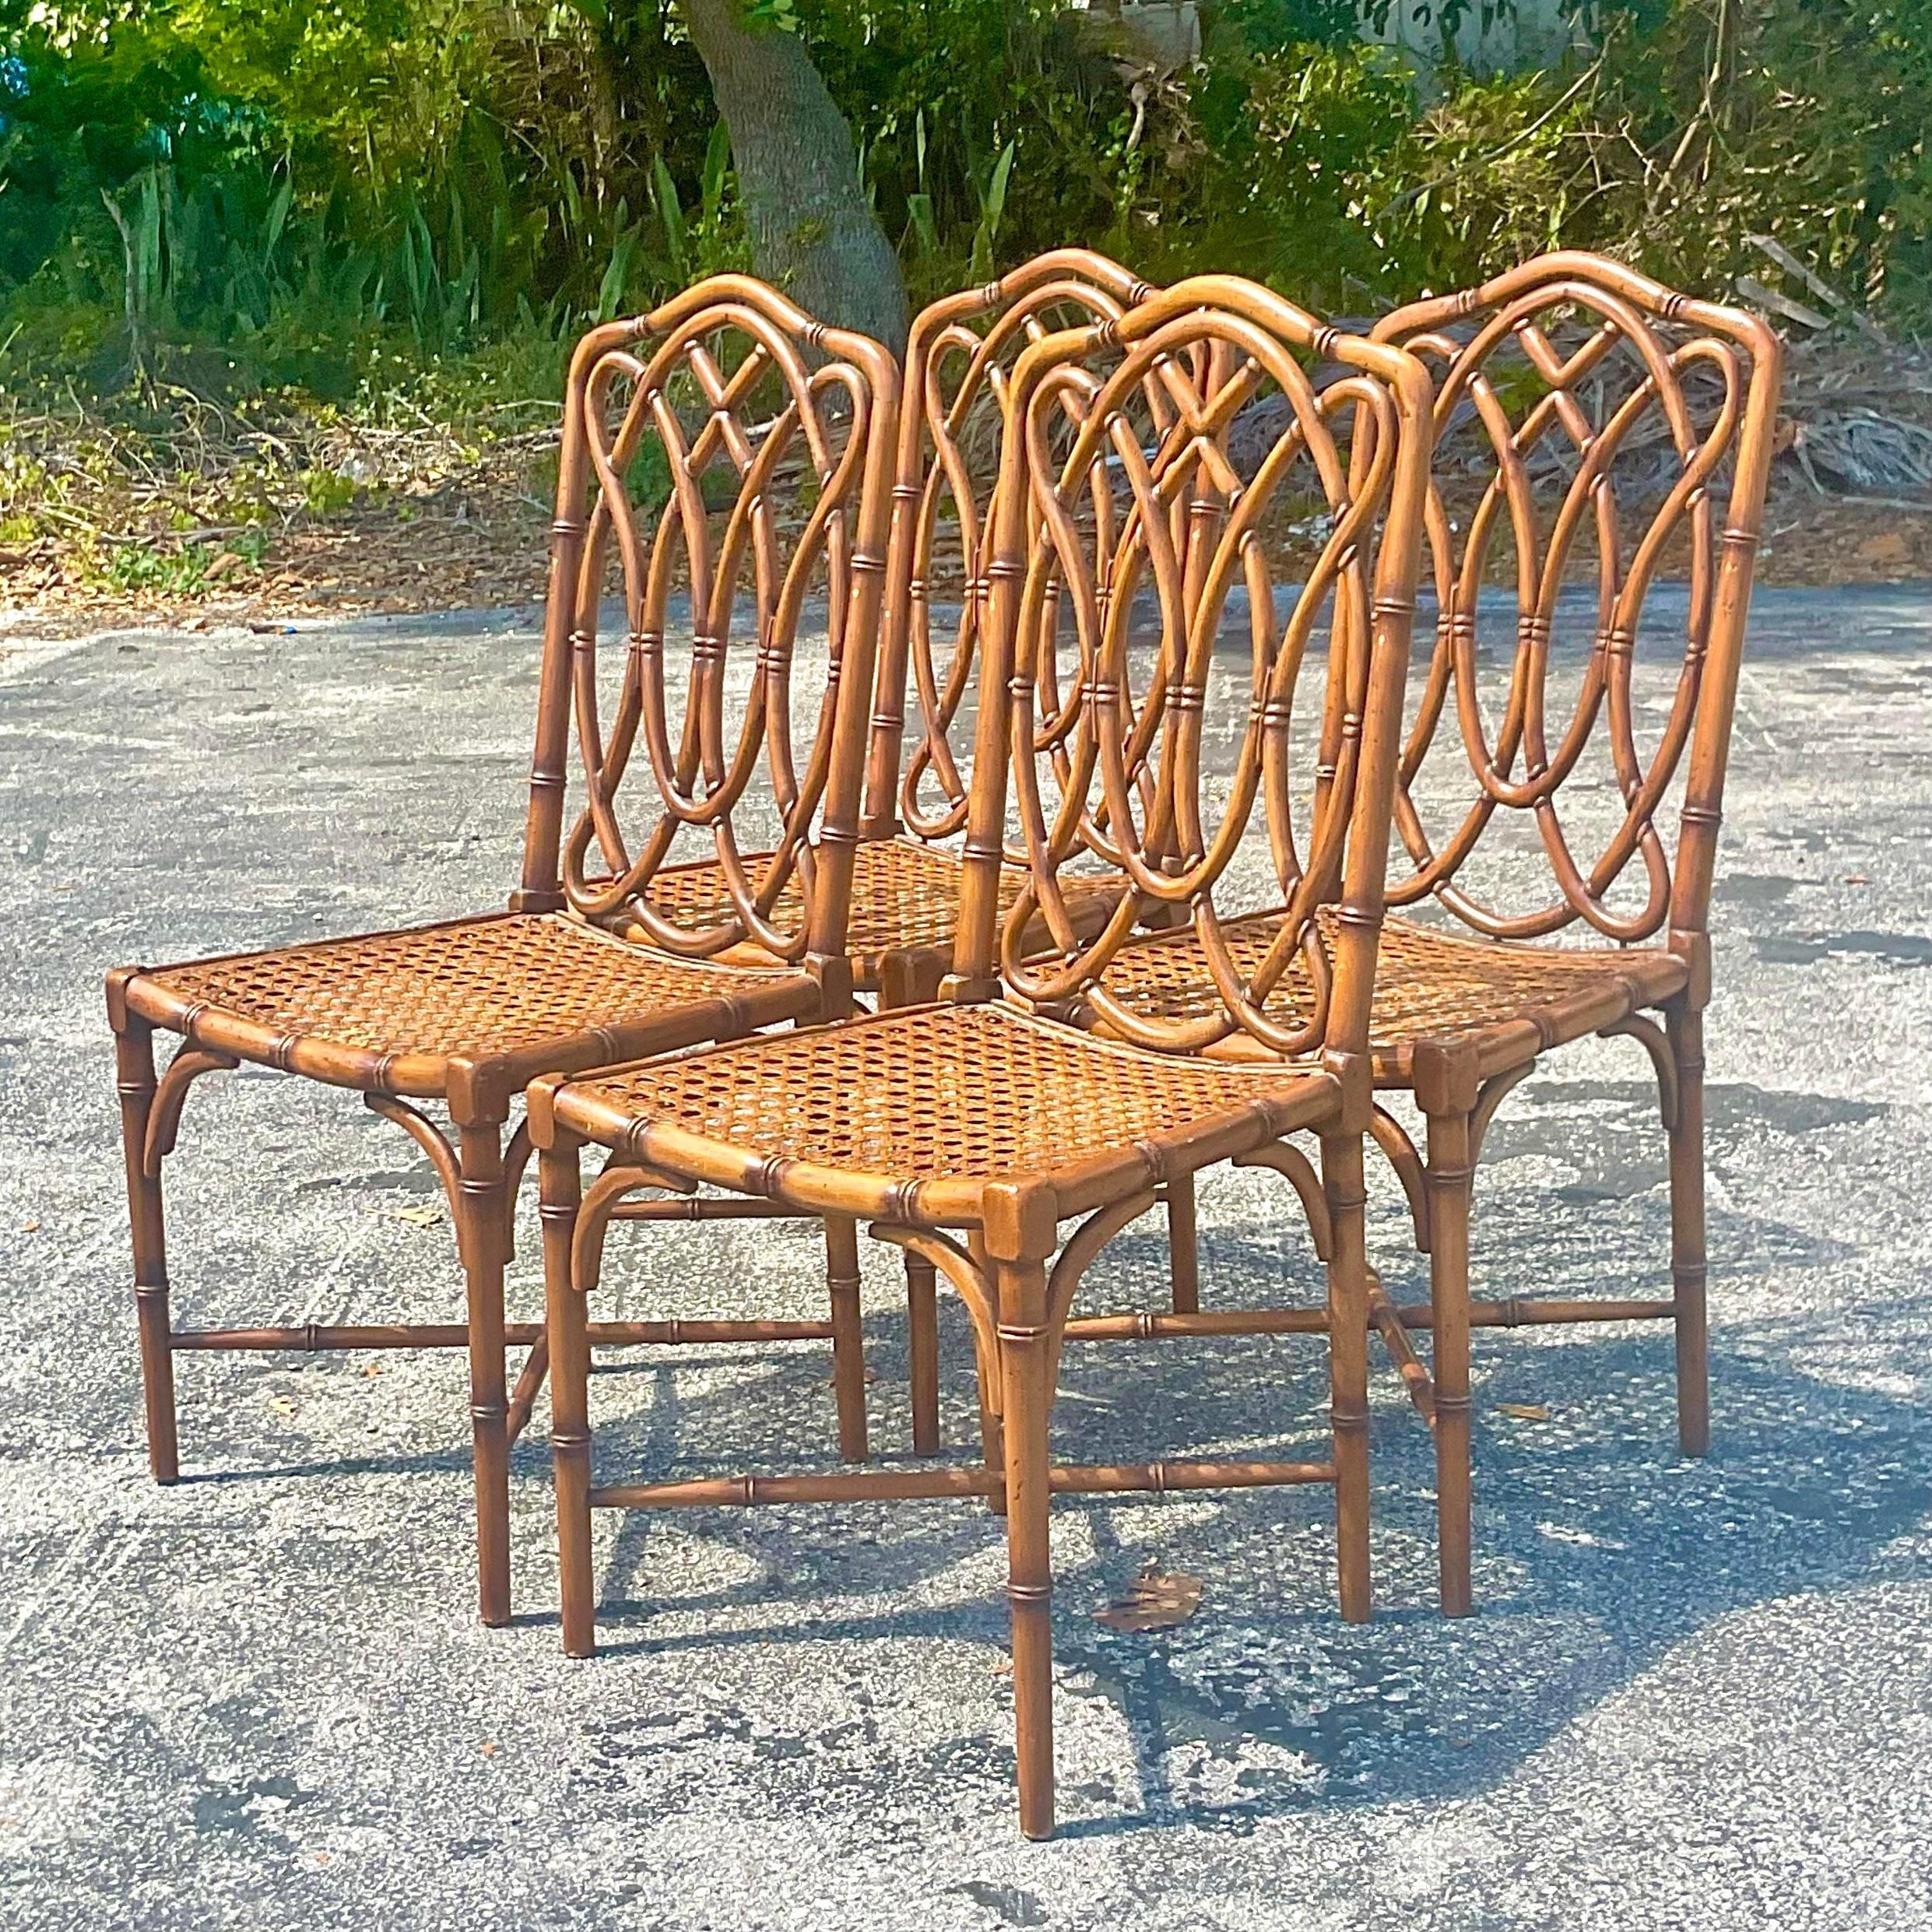 A spectacular set of four vintage coastal dining chairs. Beautiful carved bamboo frame with inset cane seats. Marked made in Italy on the bottom. Acquired from a Palm Beach estate.